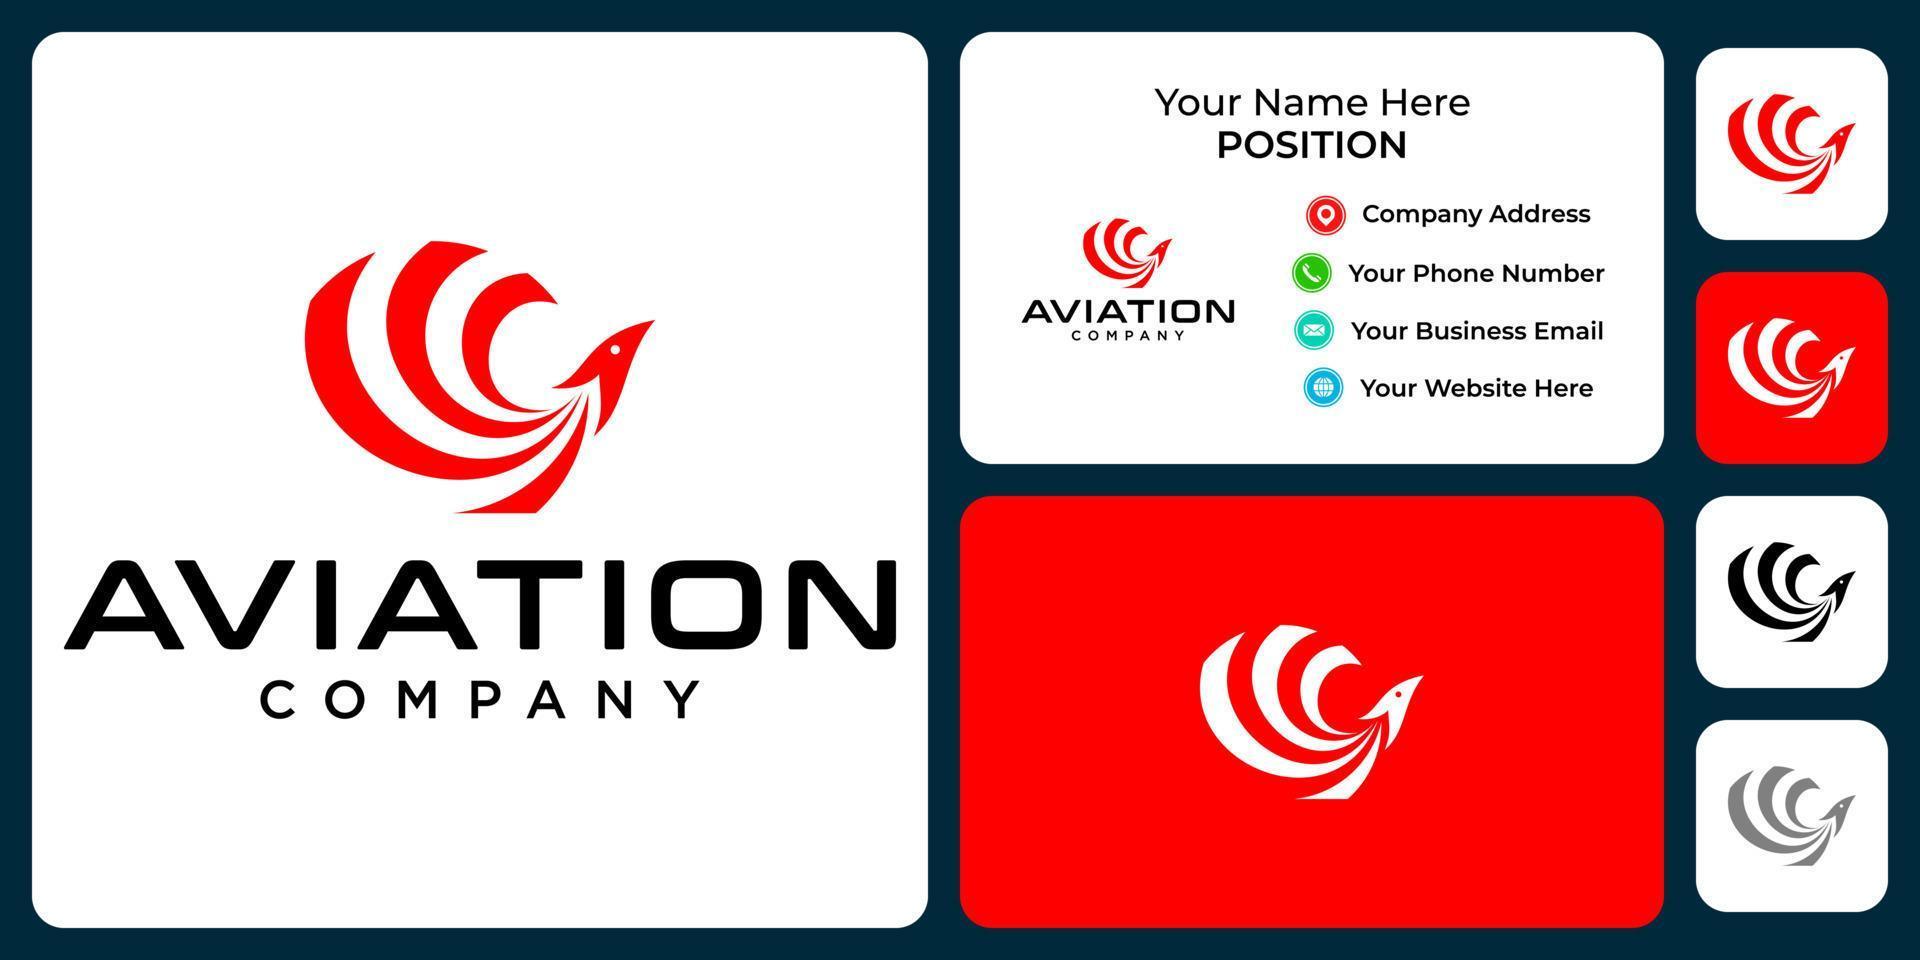 Aviation logo design with business card template. vector